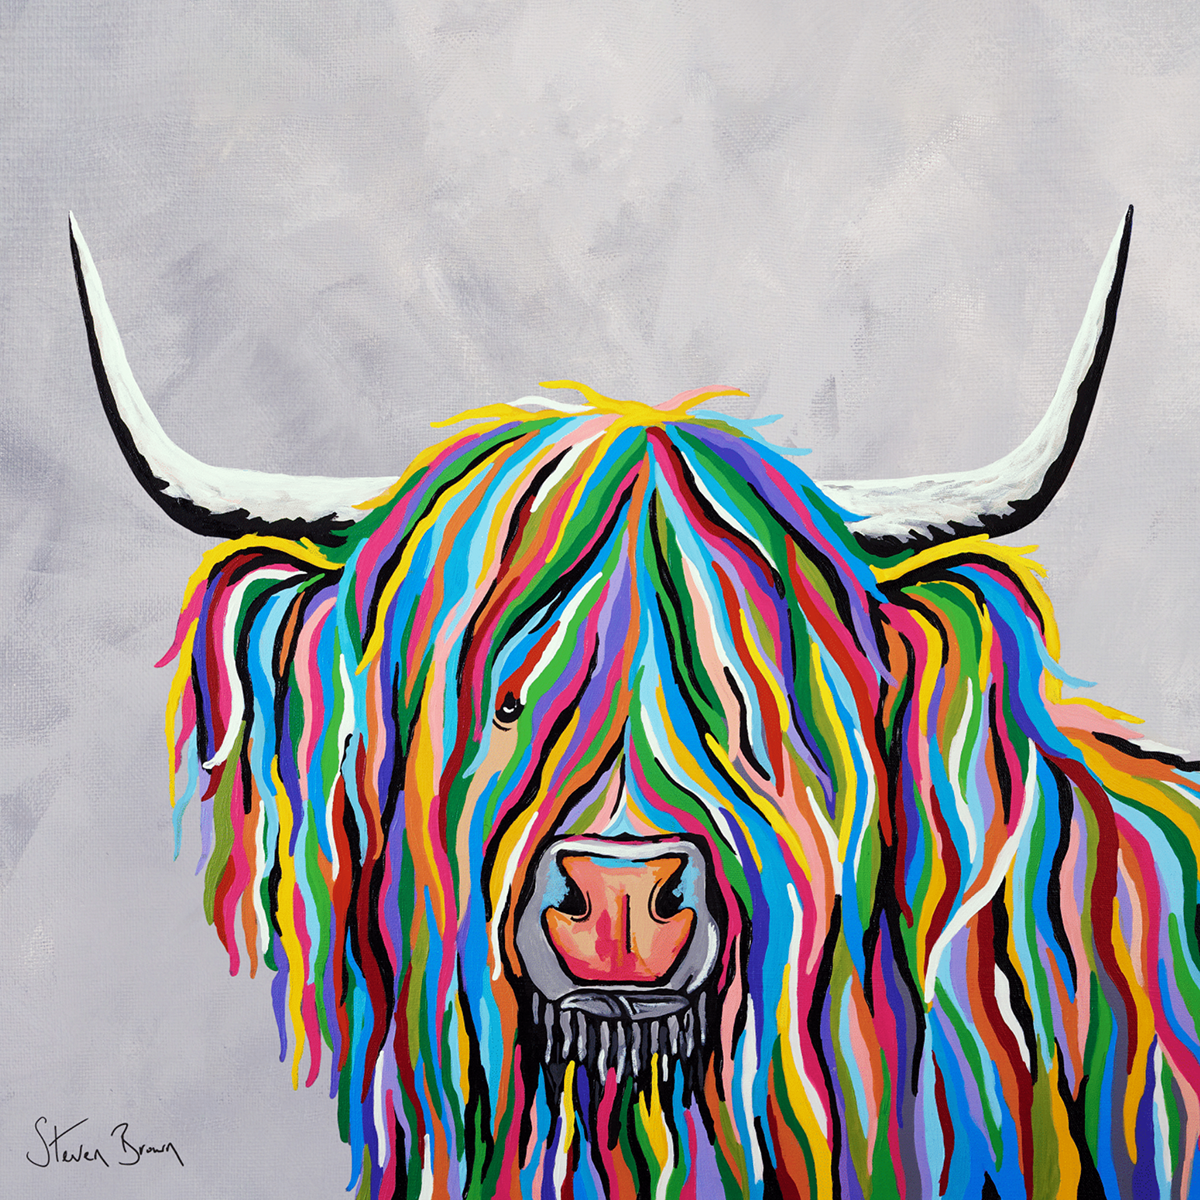 Emily McCoo by Steven Brown